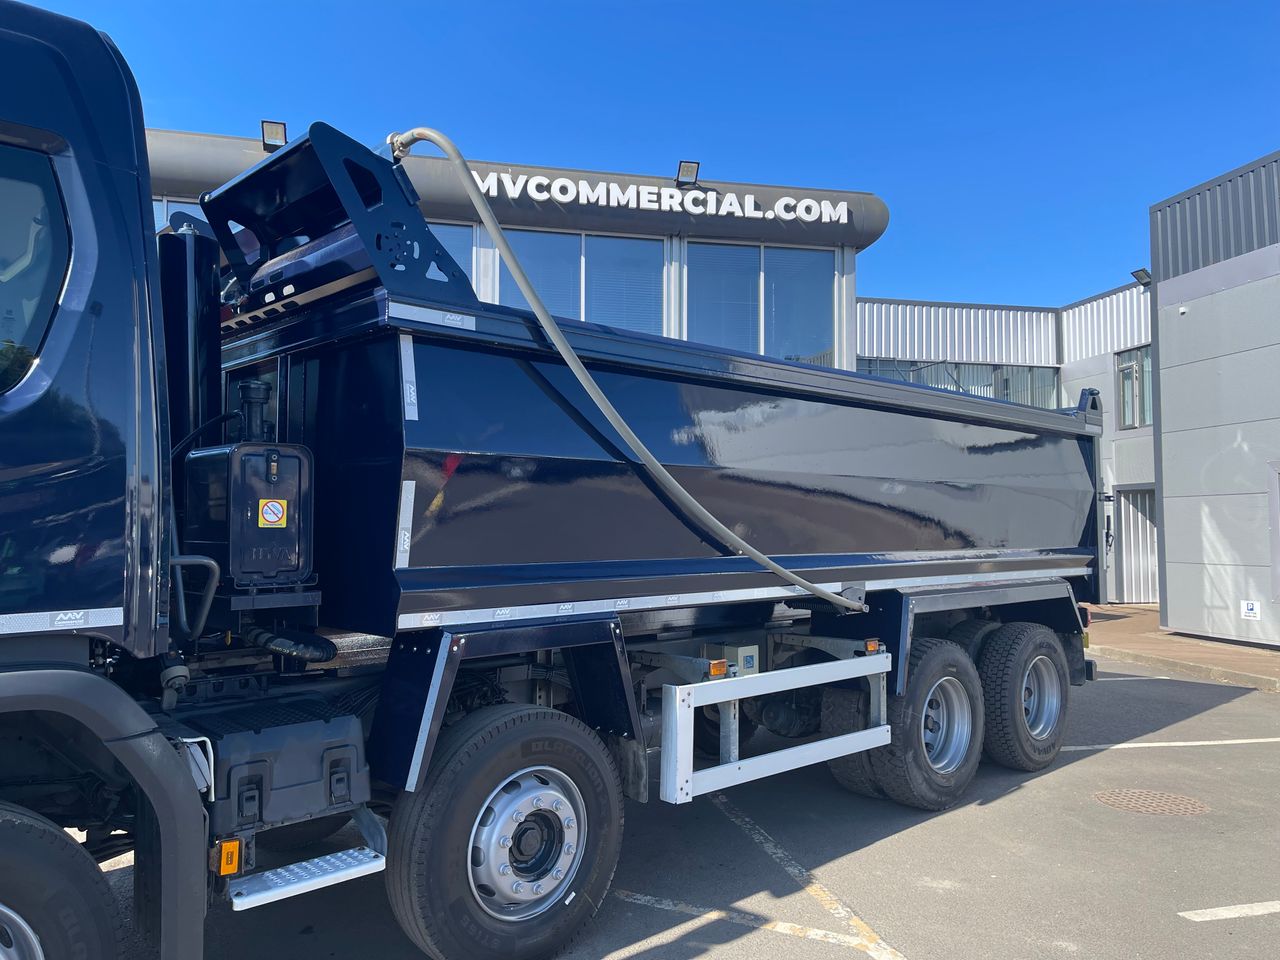 Ready to go Scania P410 XT, Tipper, 410, 32 Tonne, Day Cab, Automatic, Thompson Body with Easy Sheet, Beacons, High Ground Clearance, HYVA Ram, Air Tailgate, , -, - | for sale at MV Commercial, the UKs leading Truck, Trailers and Van supplier. (SM19BYL 348987)